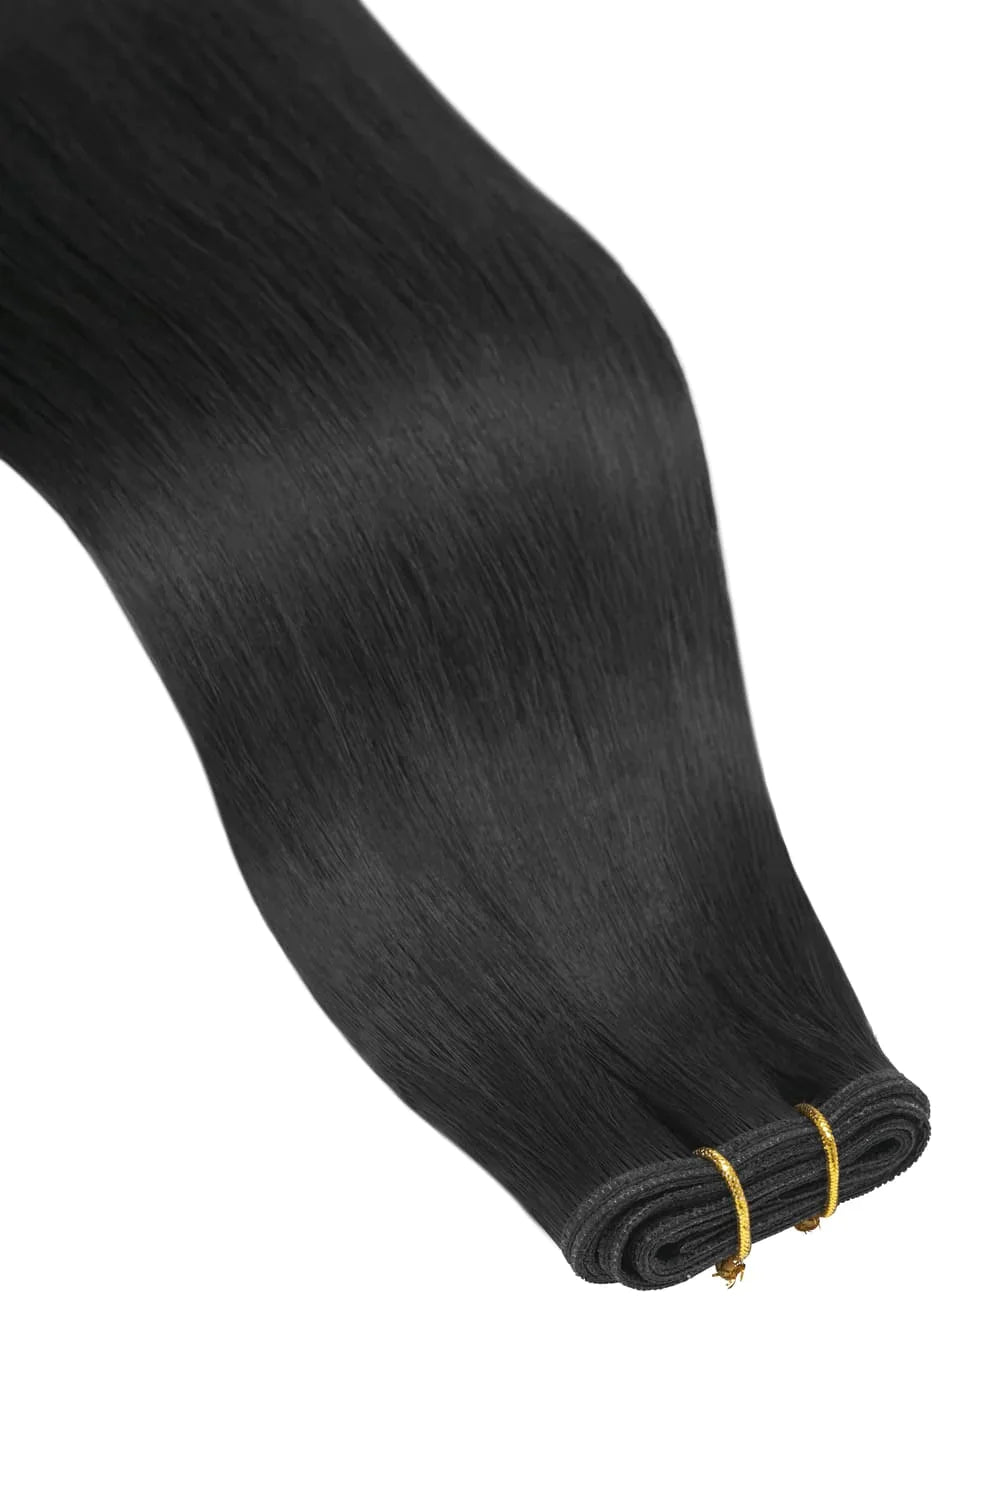 Jet Black (#1) Remy Royale Flat Weft Hair Extensions